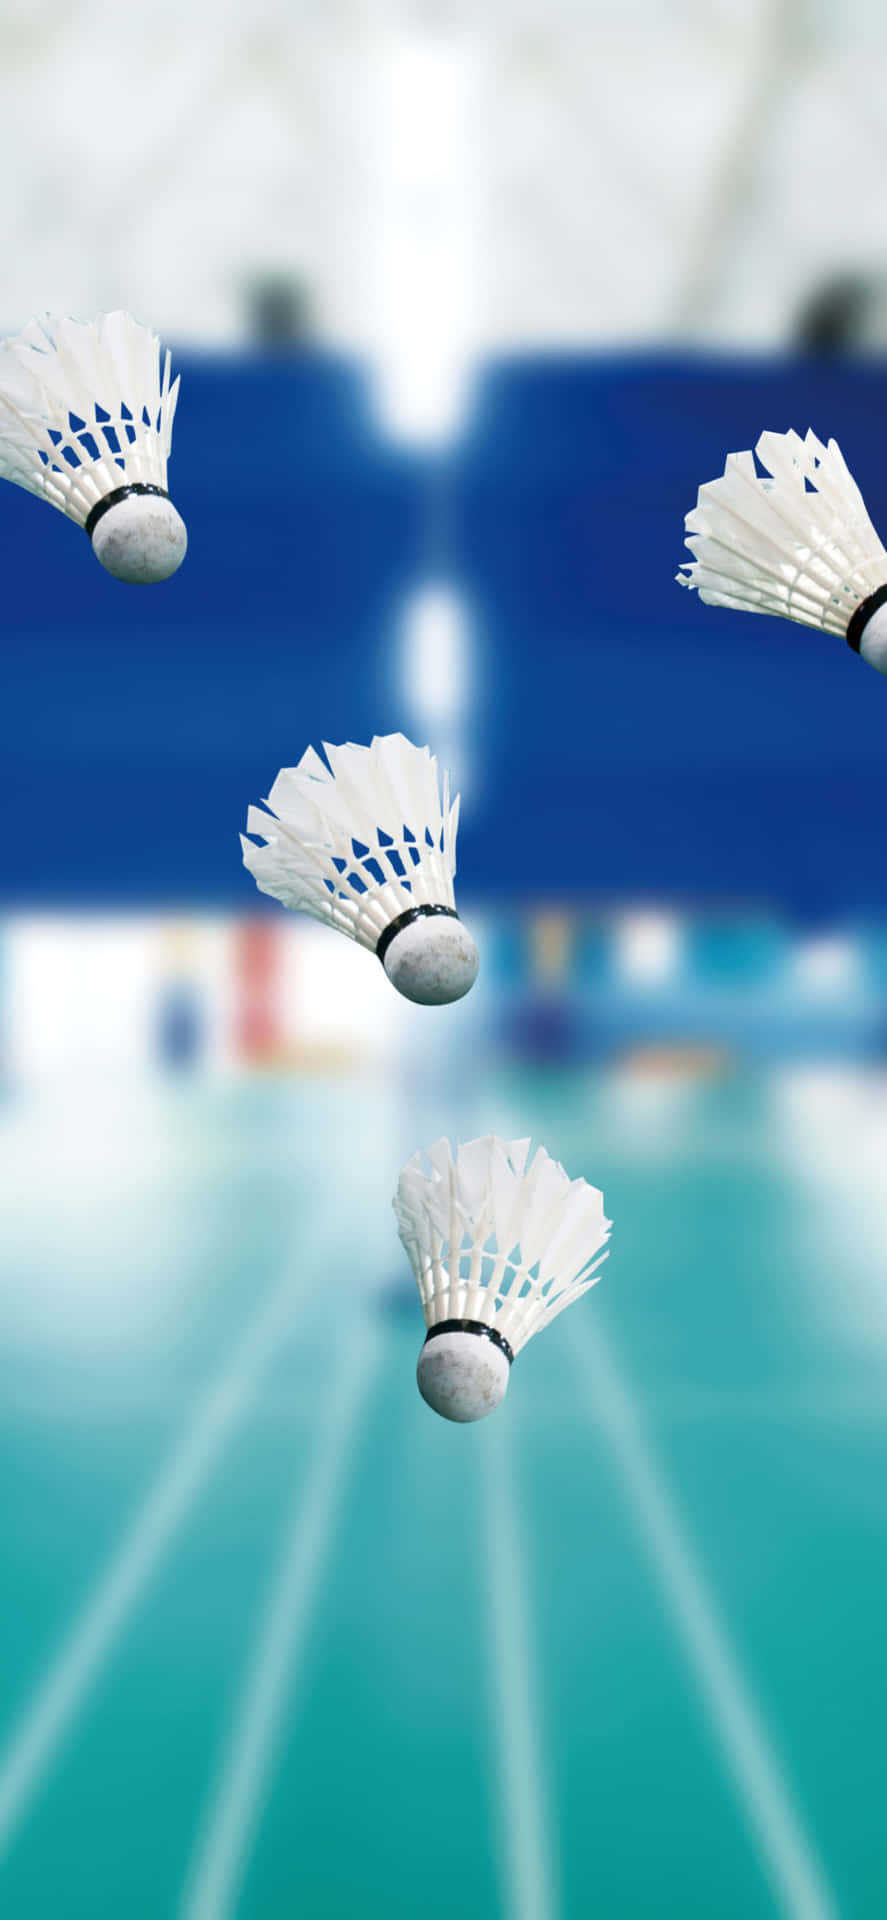 Enjoy playing badminton with the new iPhone XS Max